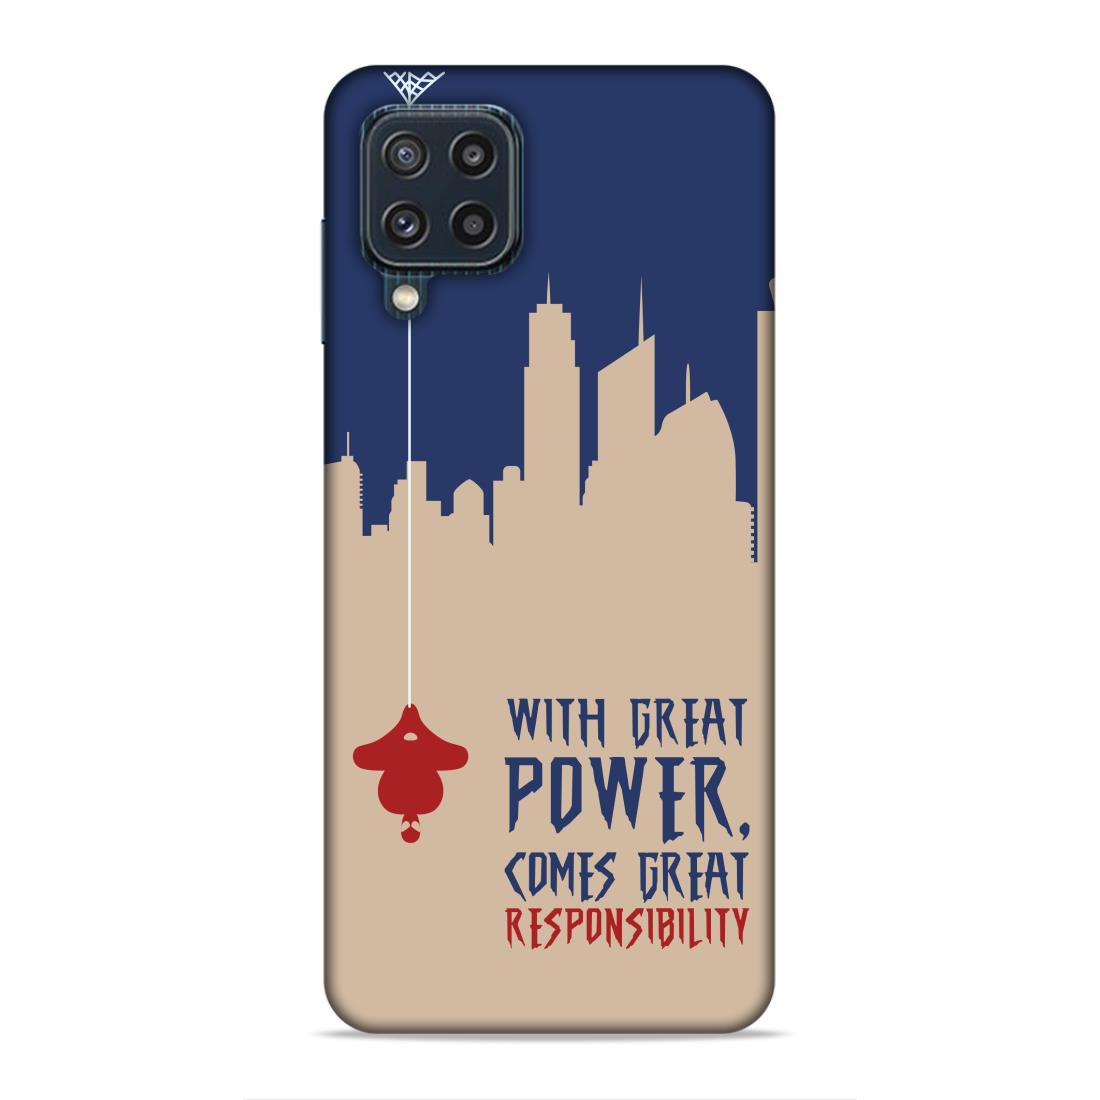 Great Power Comes Great Responsibility Hard Back Case For Samsung Galaxy A22 4G / F22 4G / M32 4G